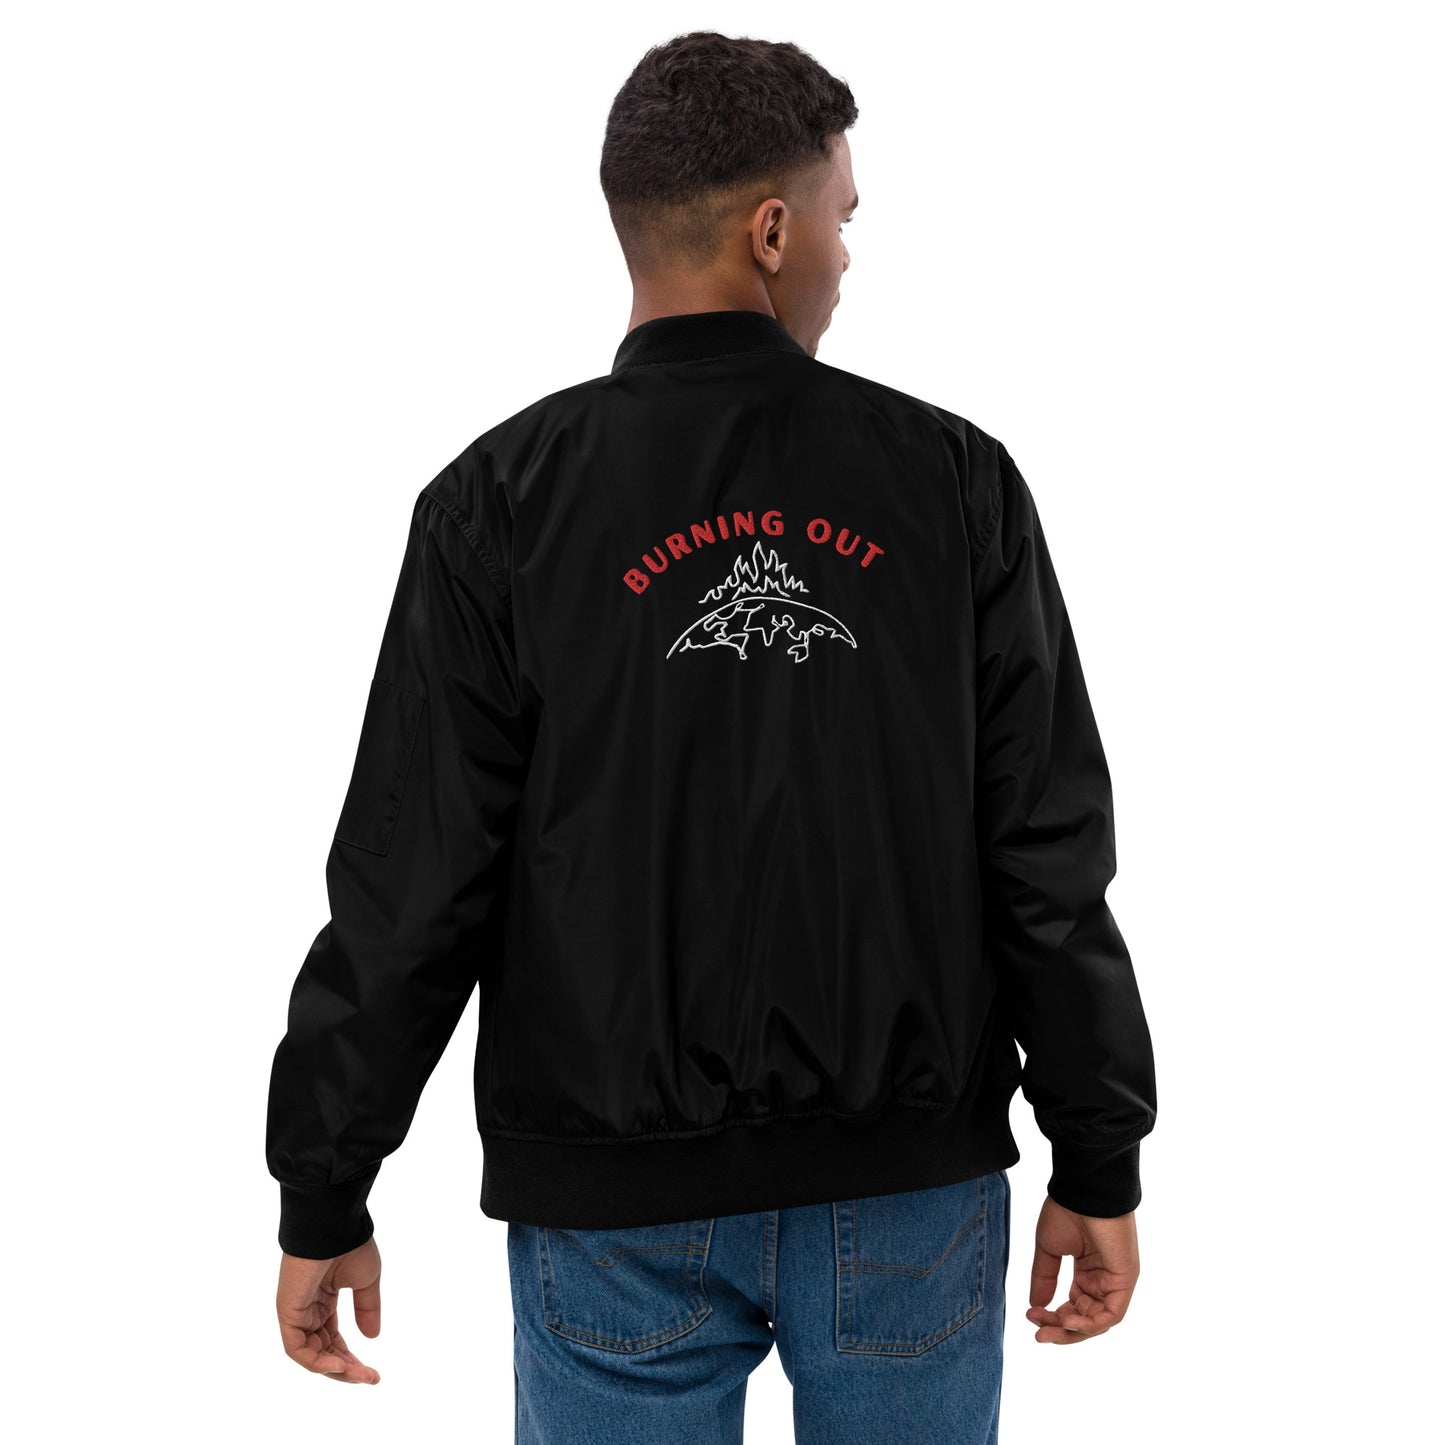 Burning Out - Embroidered Bomber Jacket